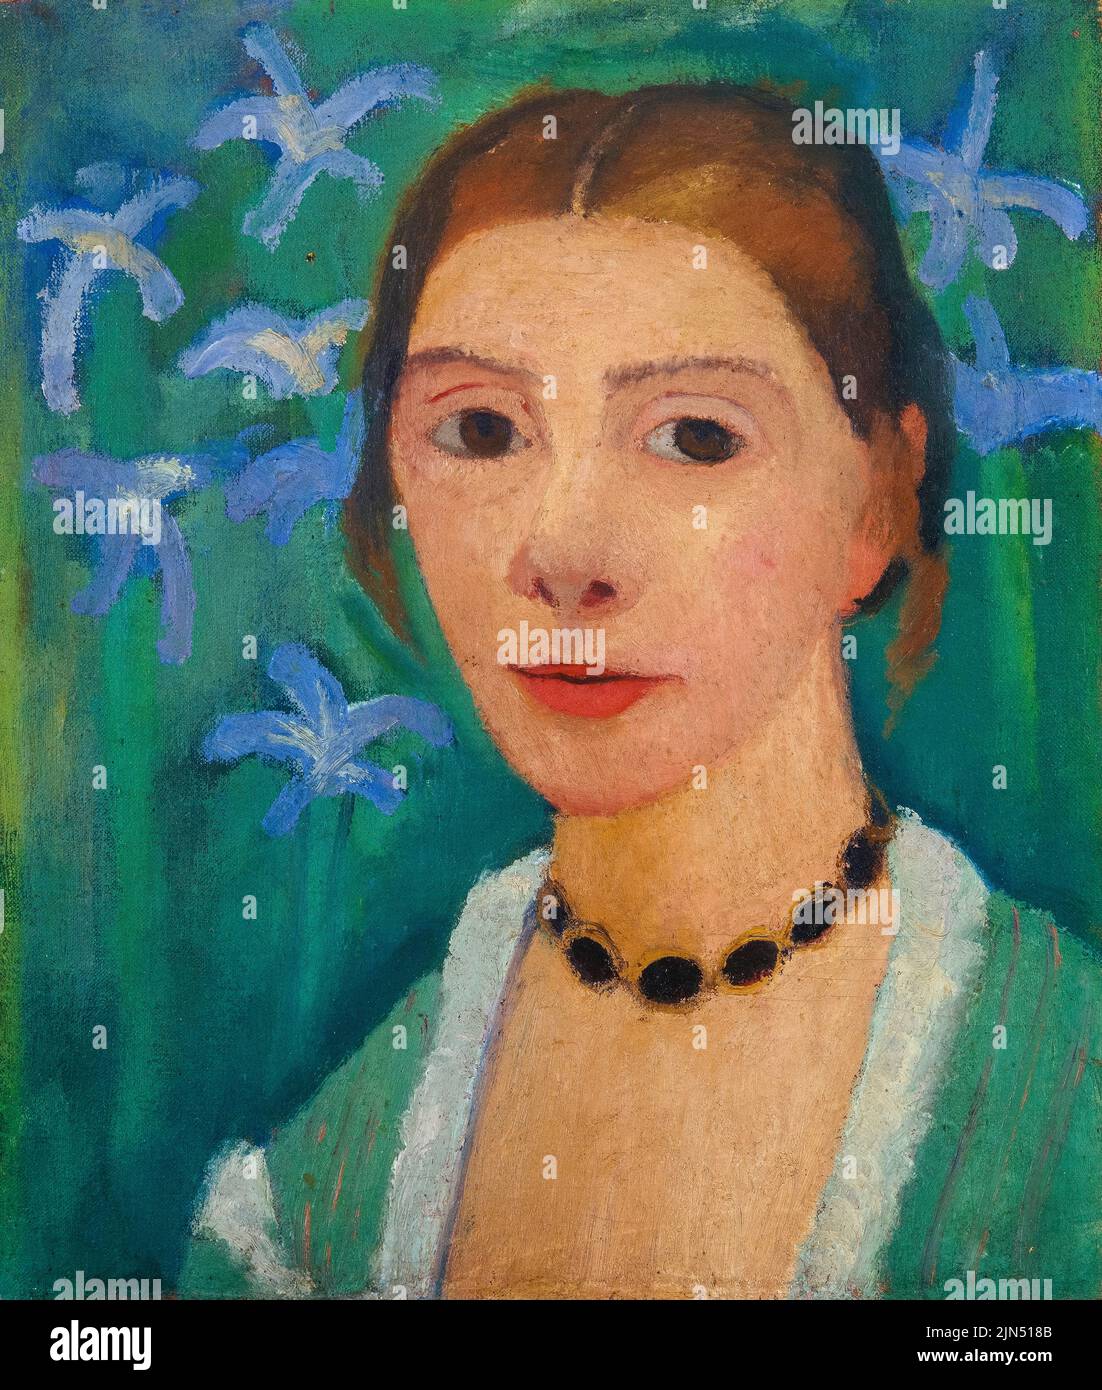 Paula Modersohn Becker (1876-1907), Self-portrait in front of a green background with a blue iris, painting in oil on canvas, 1900-1907 Stock Photo